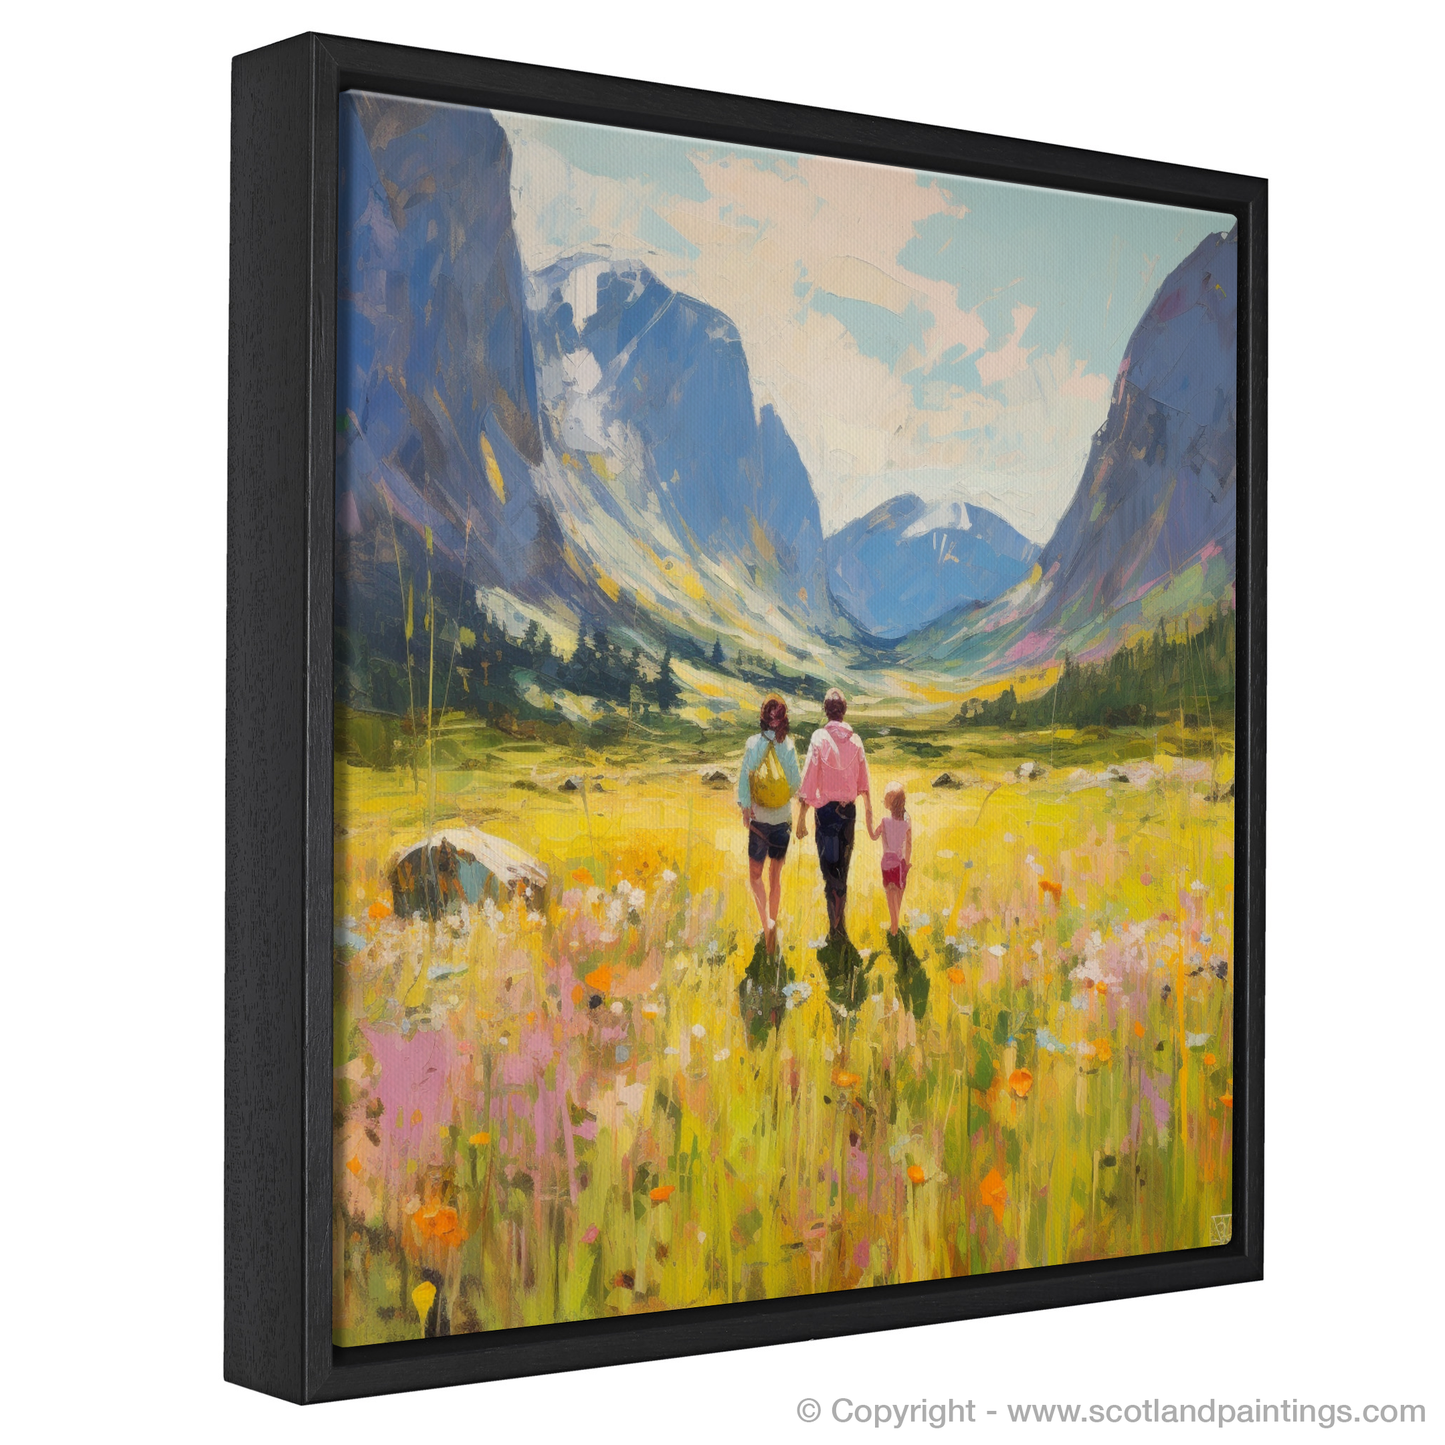 Painting and Art Print of Family in Glencoe during summer entitled "Summer Serenity in Glencoe: A Family's Highland Idyll".